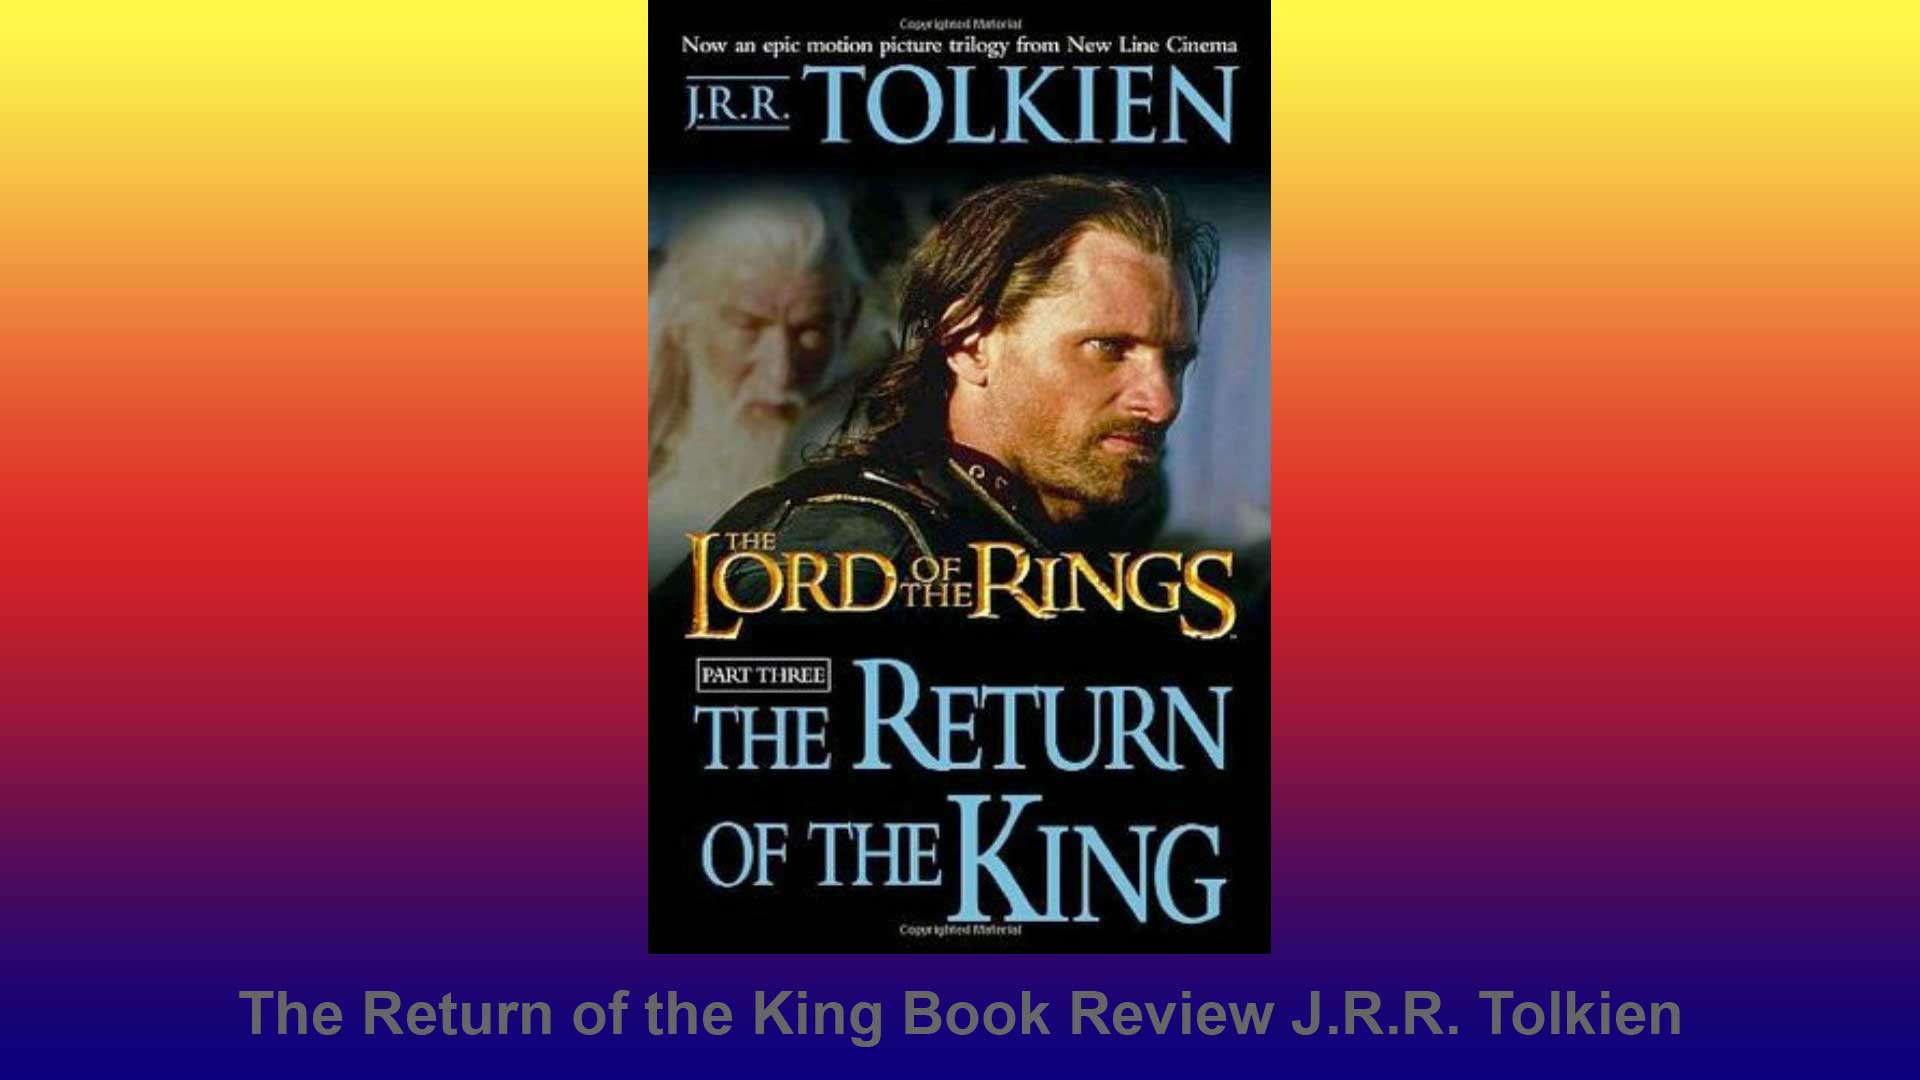 The Return of the King Book Review Cover Image